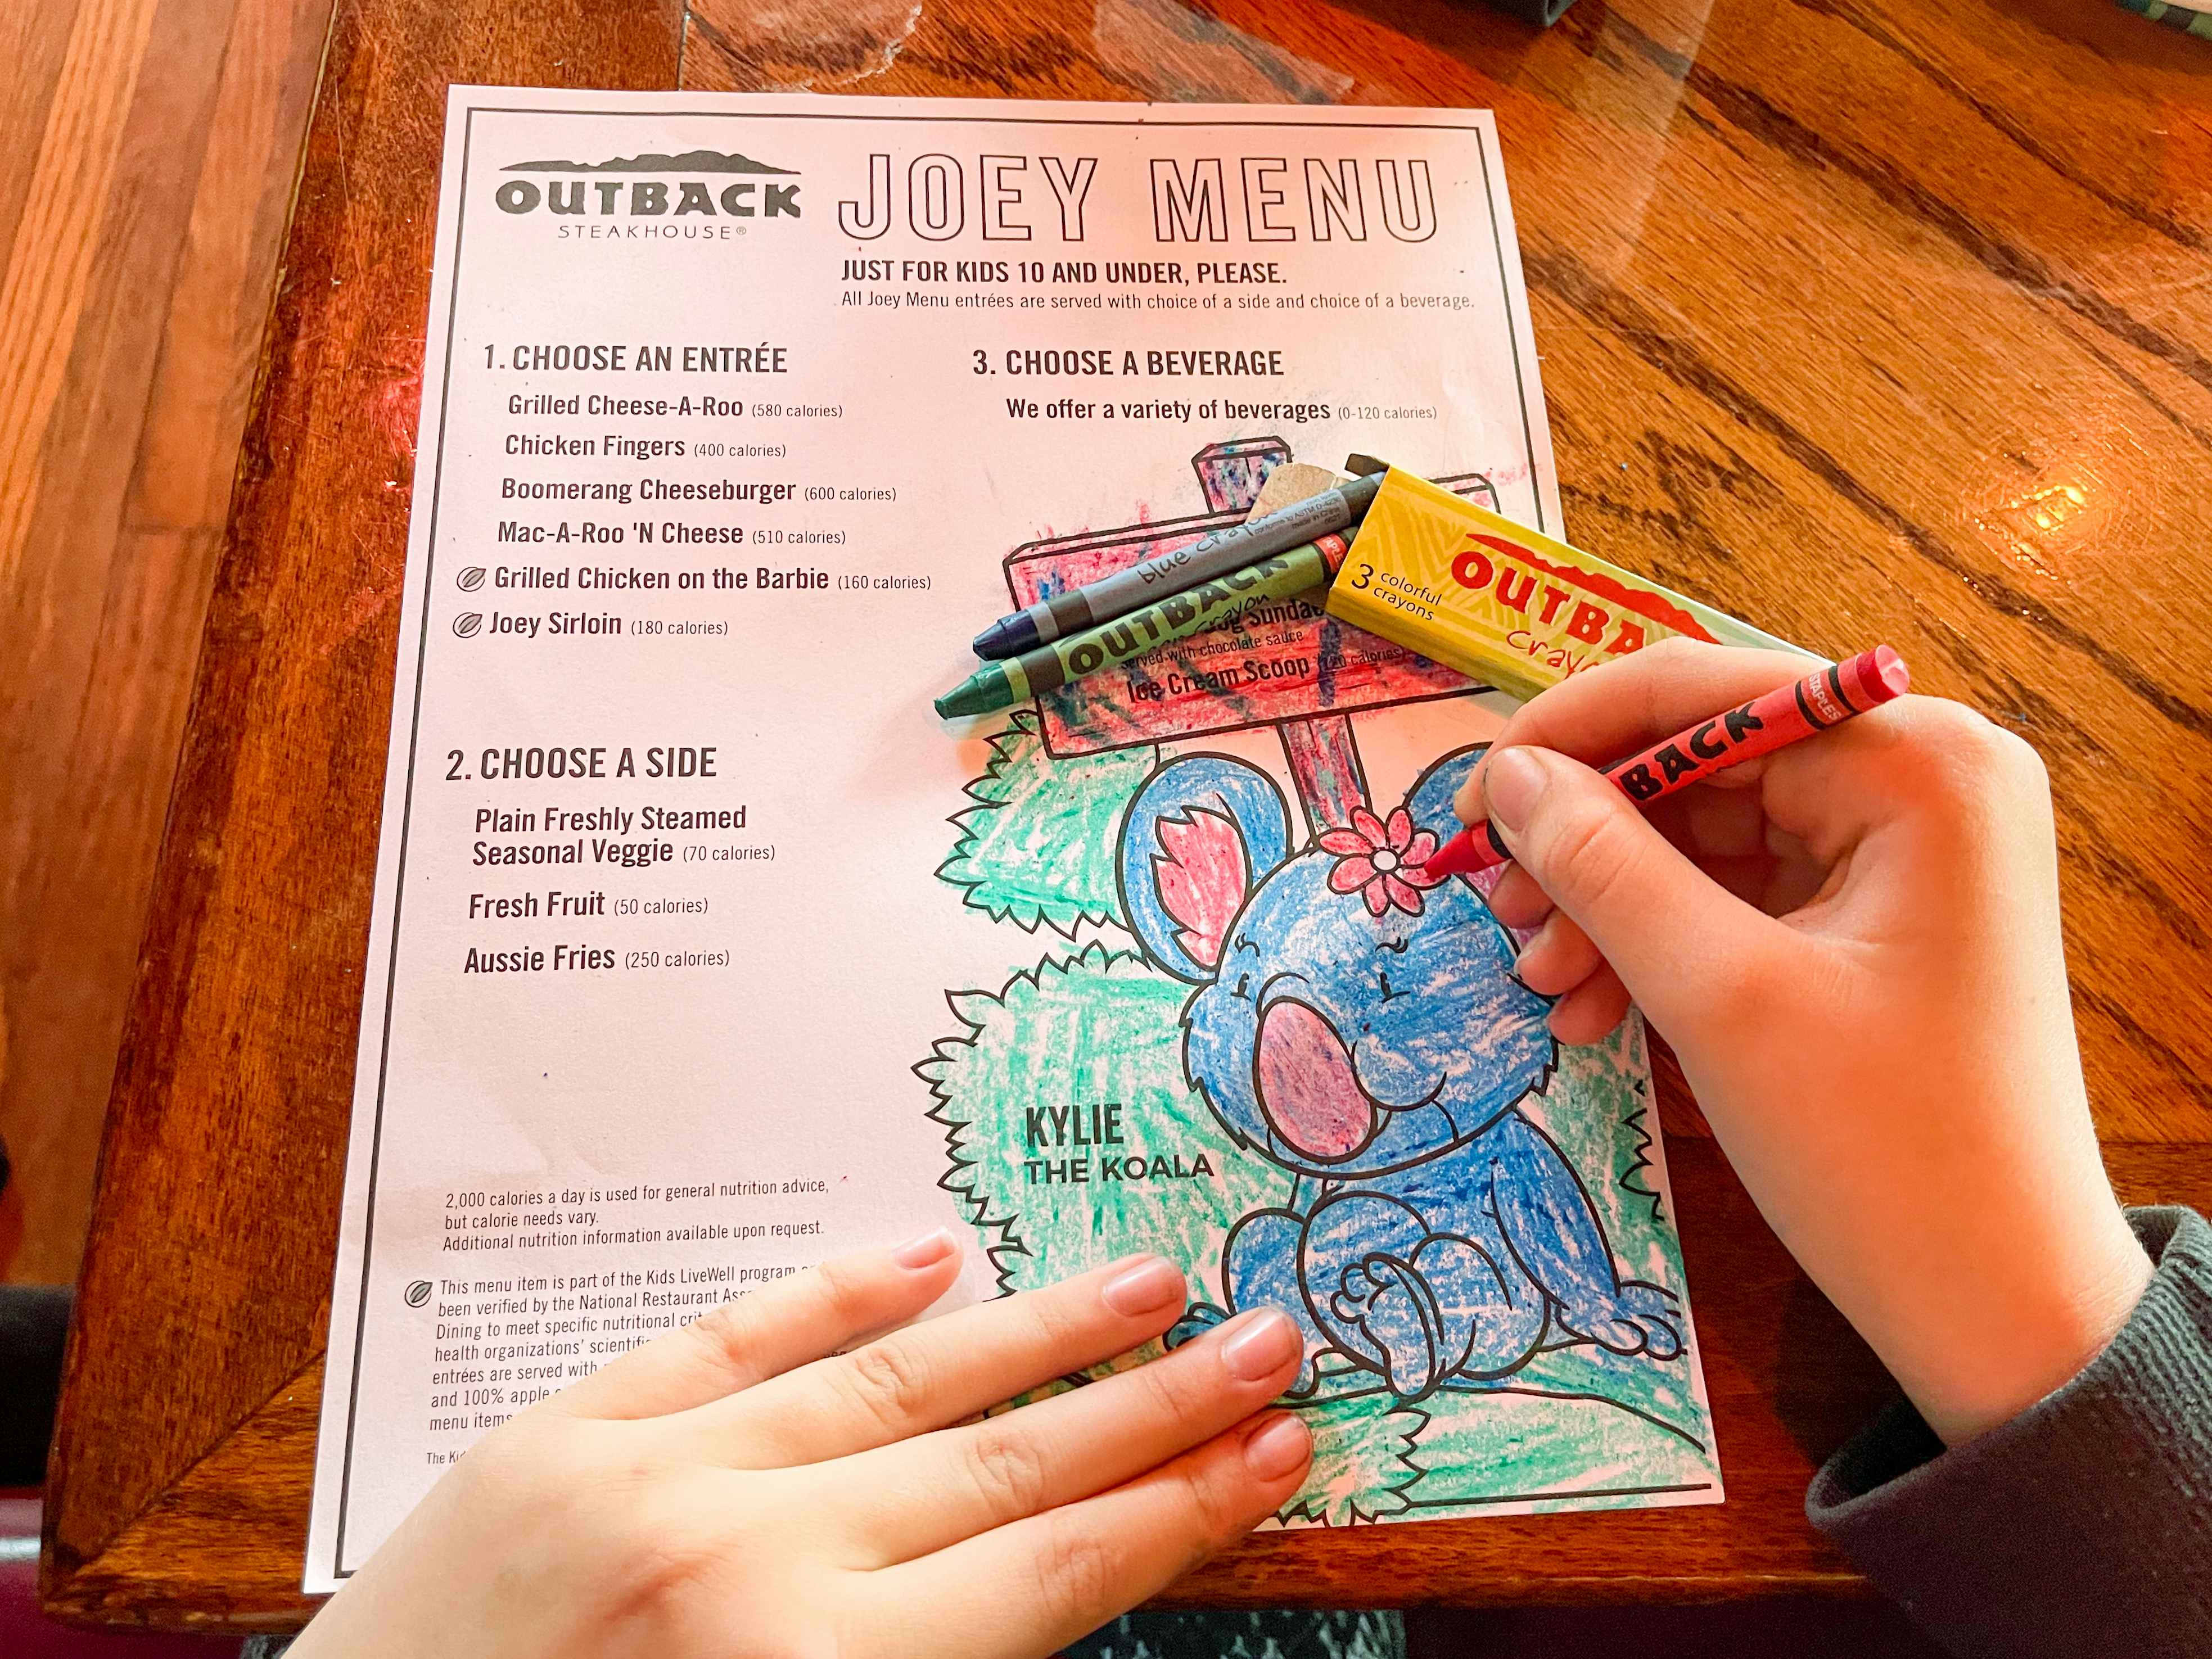 A person coloring the Outback Steakhouse Joey Menu with crayons.